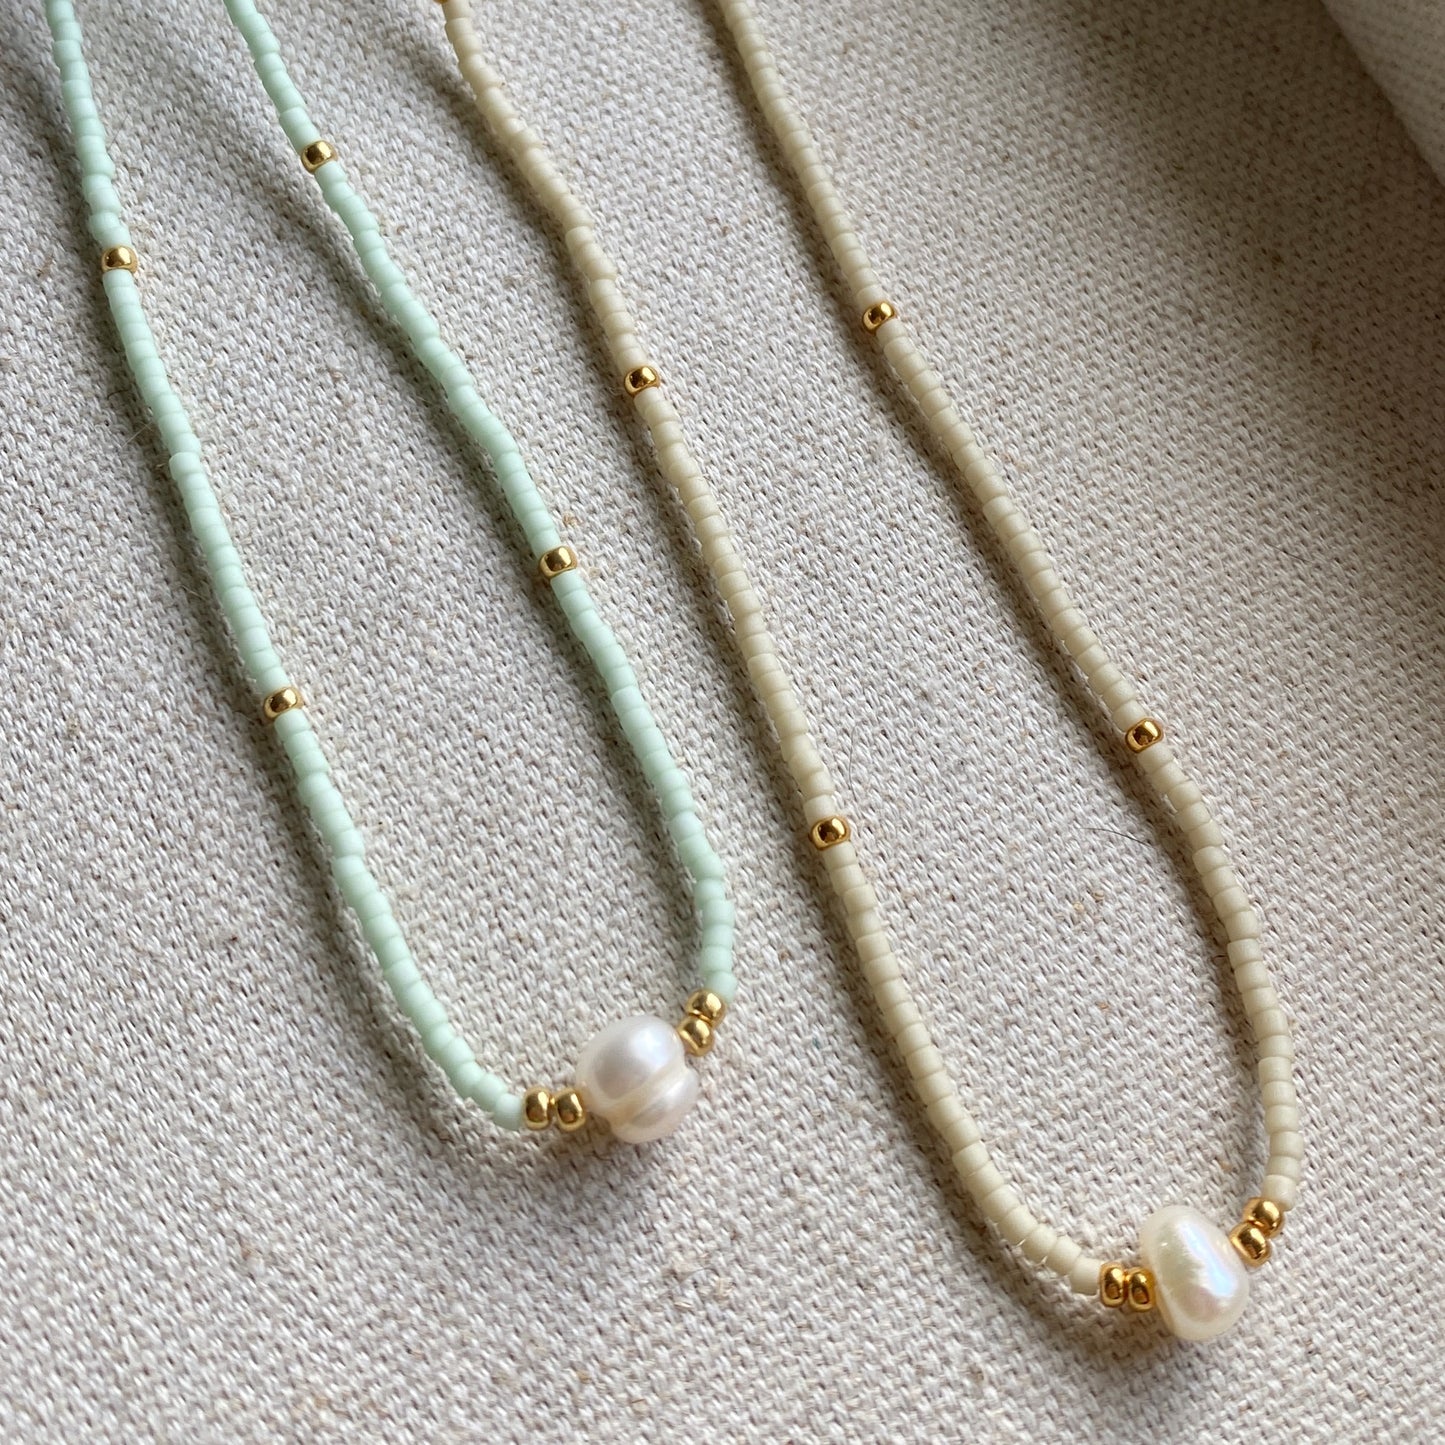 Beaded Necklace Seed Bead Pastel Gold Jewelry